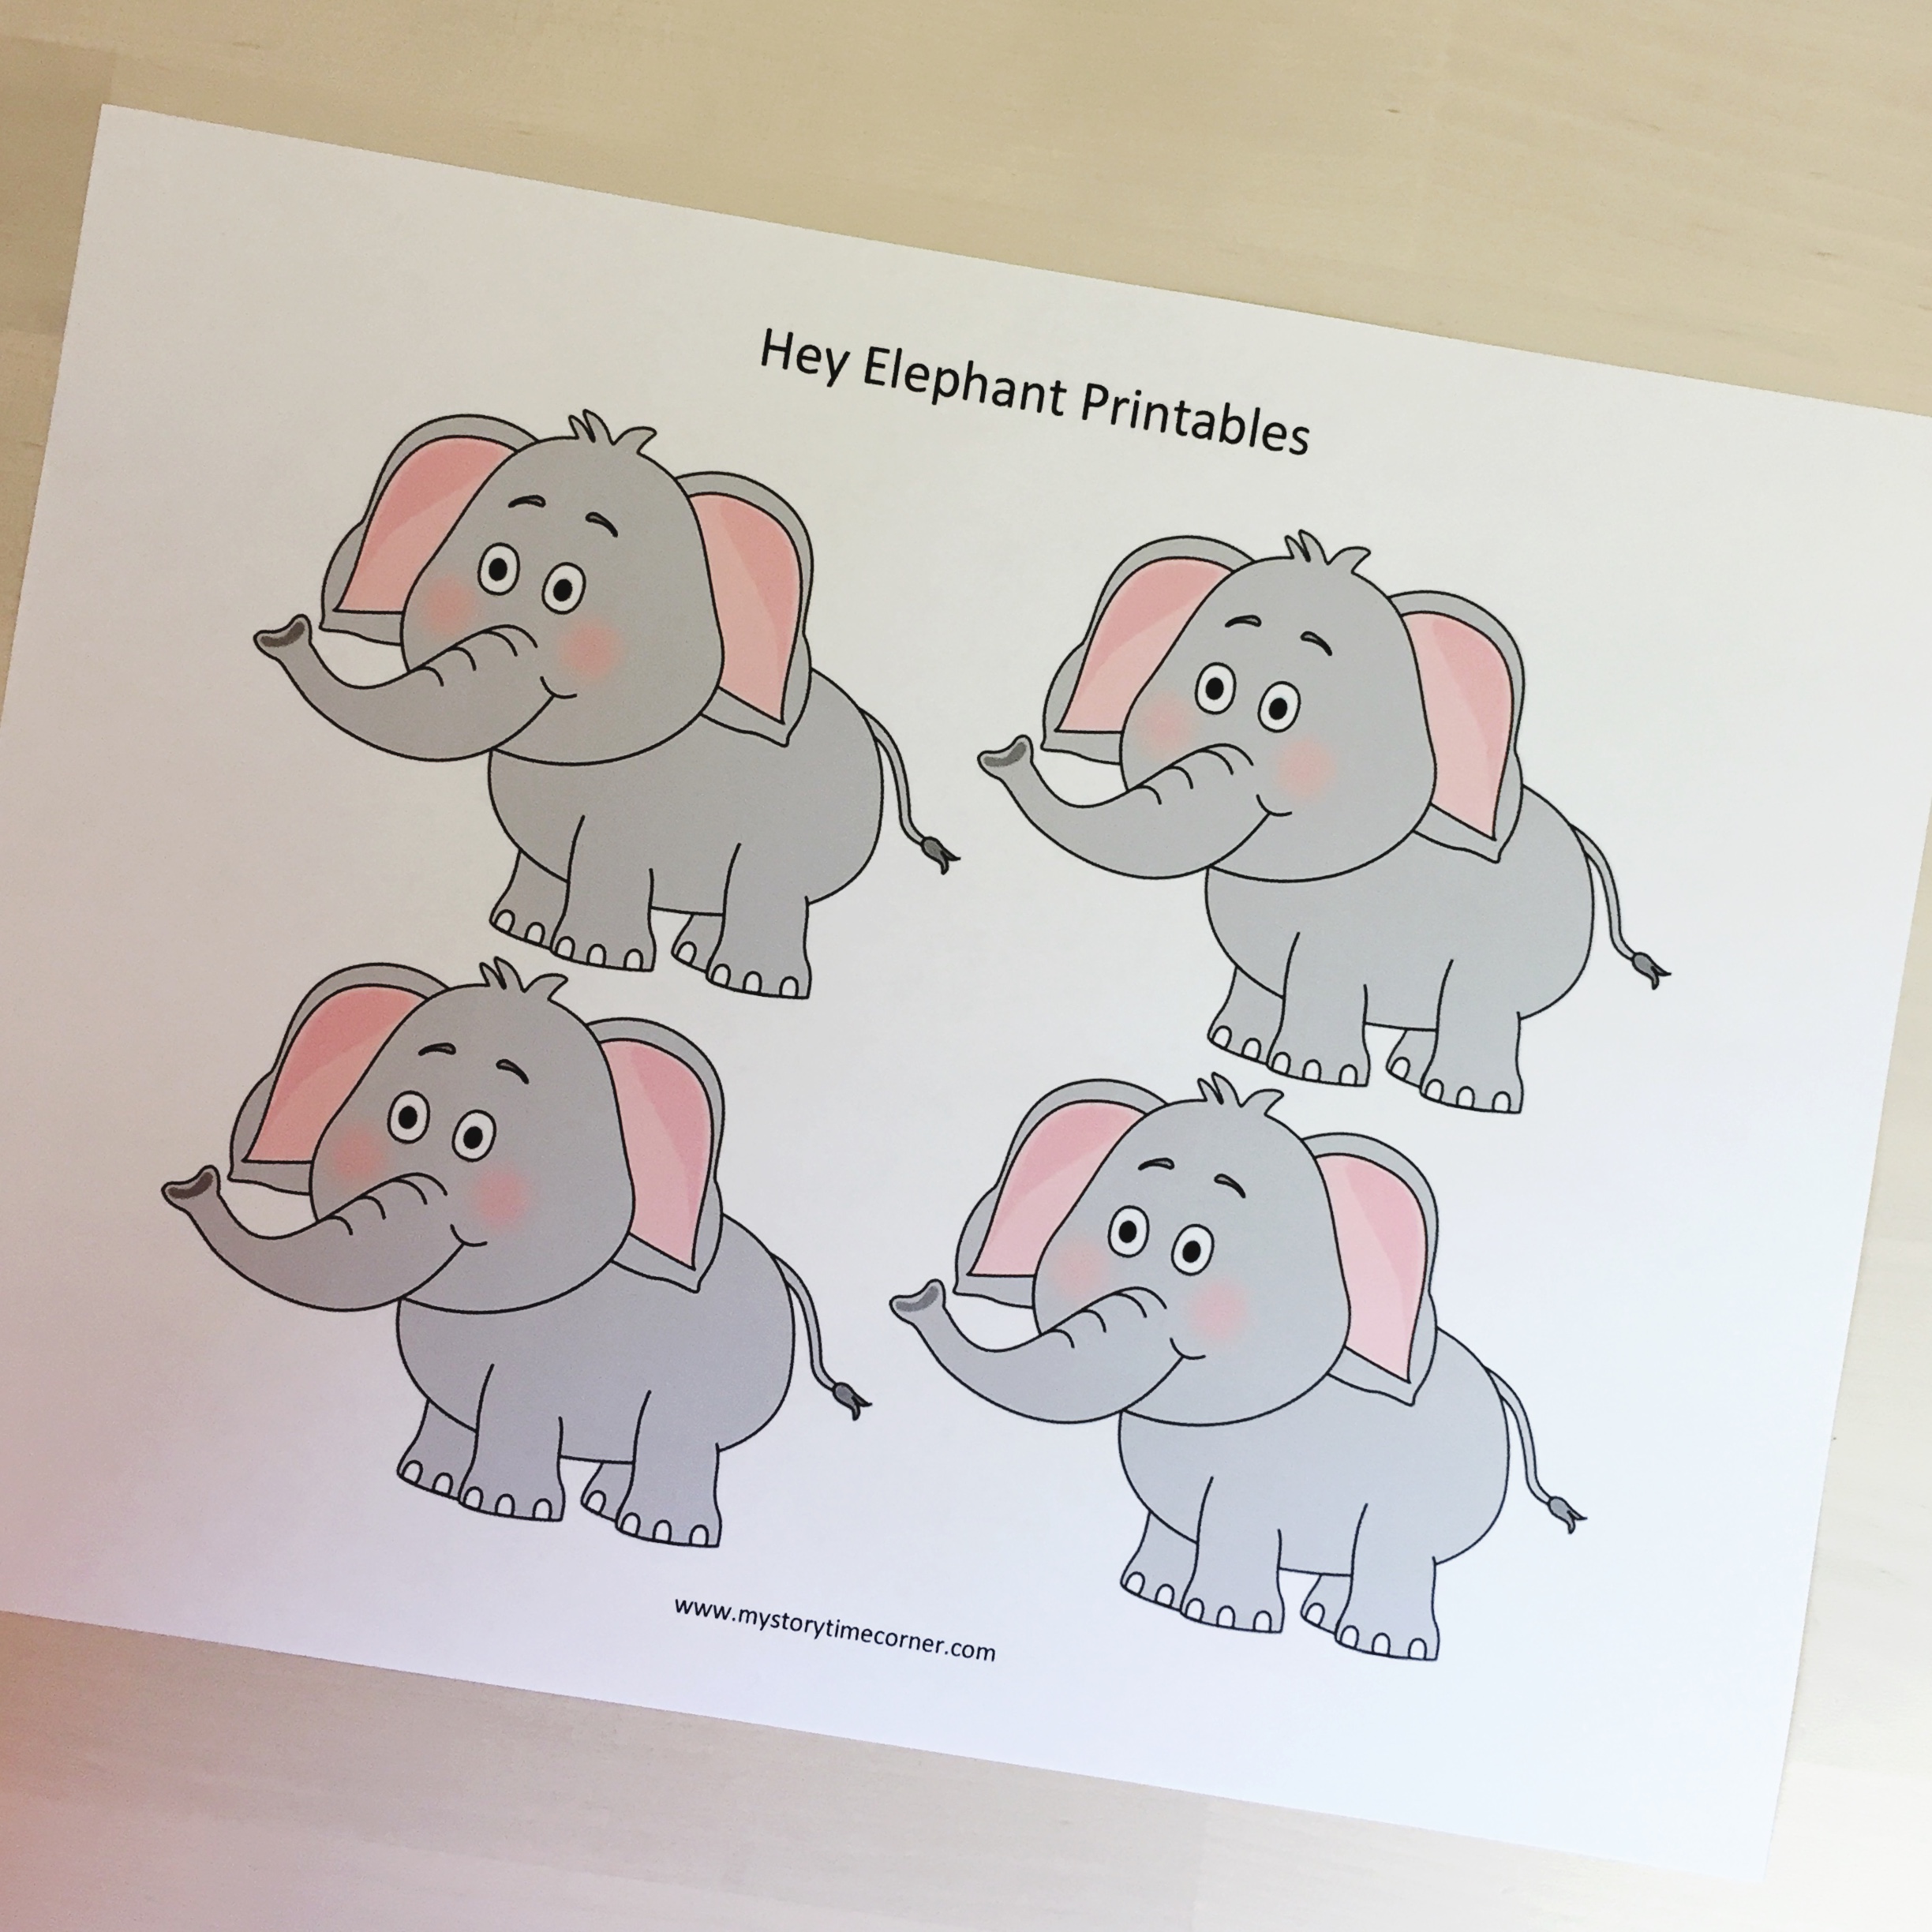 Hey Elephant Song for Story Time - My Storytime corner